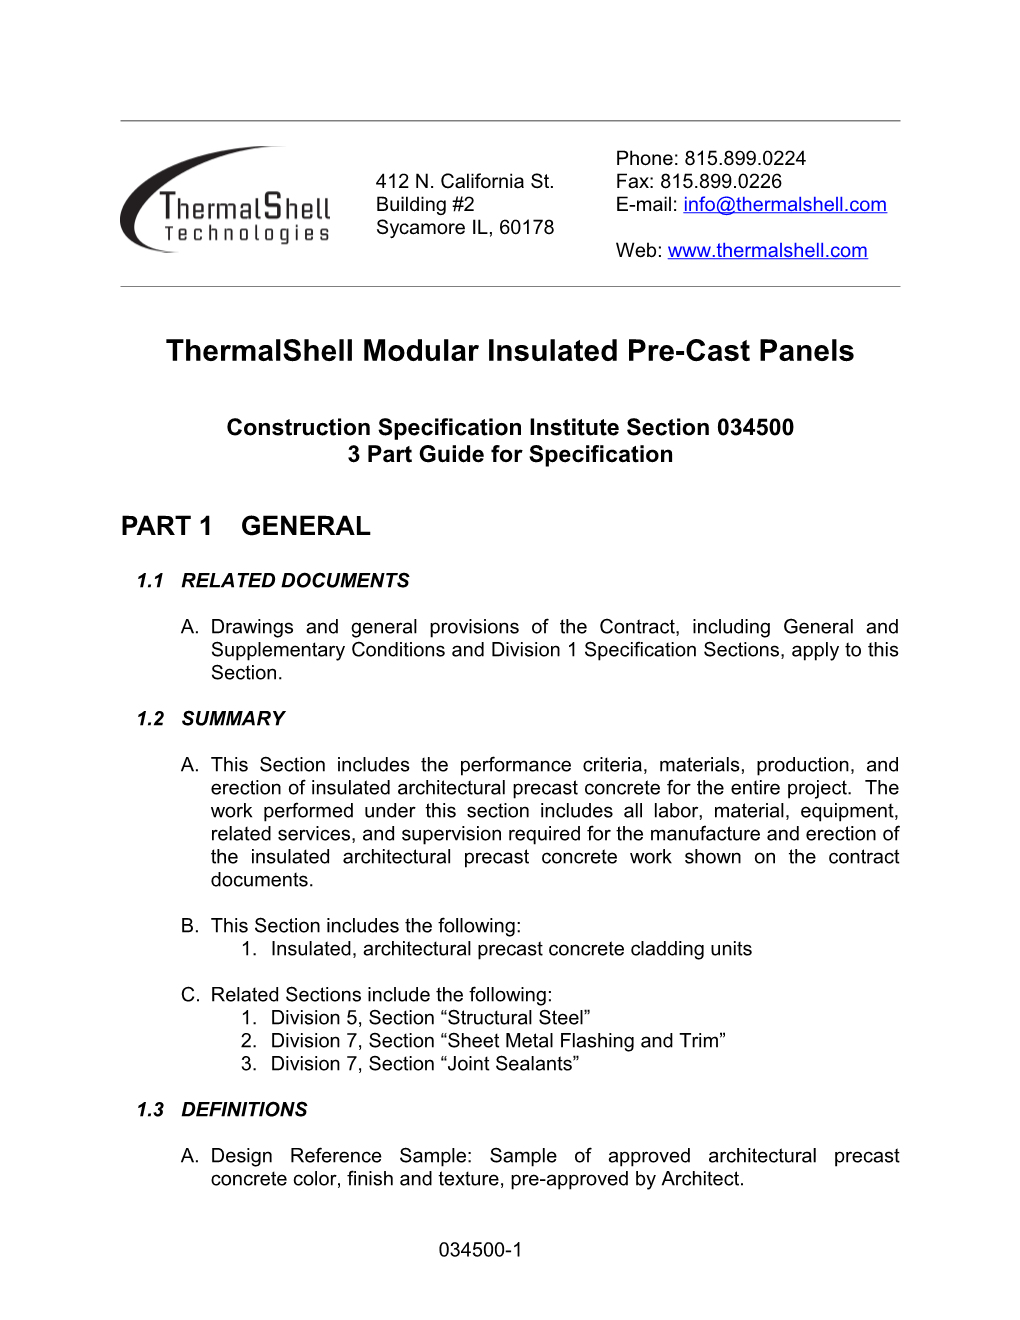 Thermalshell Modular Insulated Pre-Cast Panels